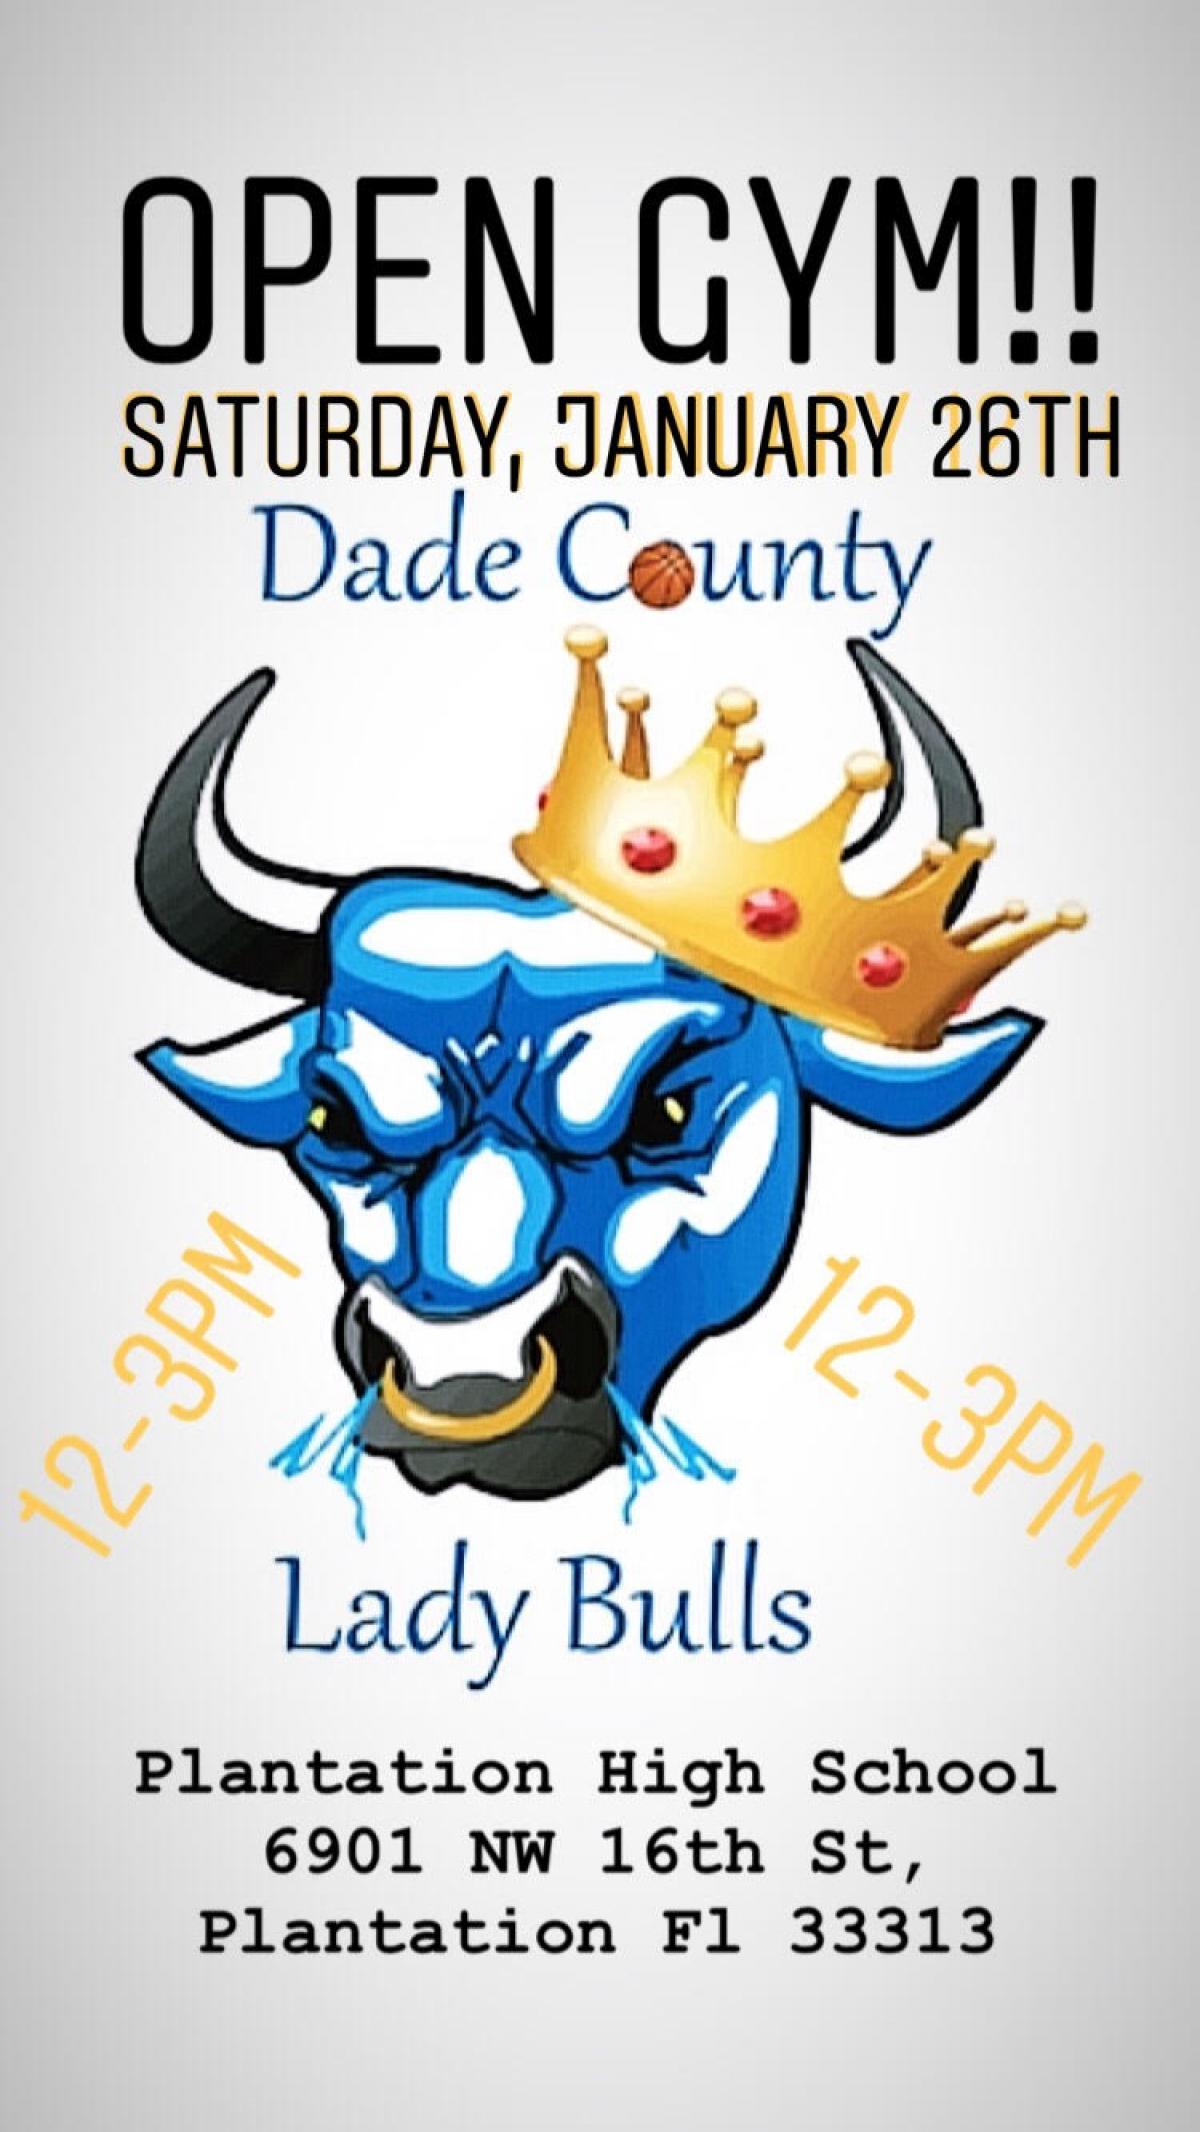 FREE OPEN GYM with the LADY BULLS 1/26/2019